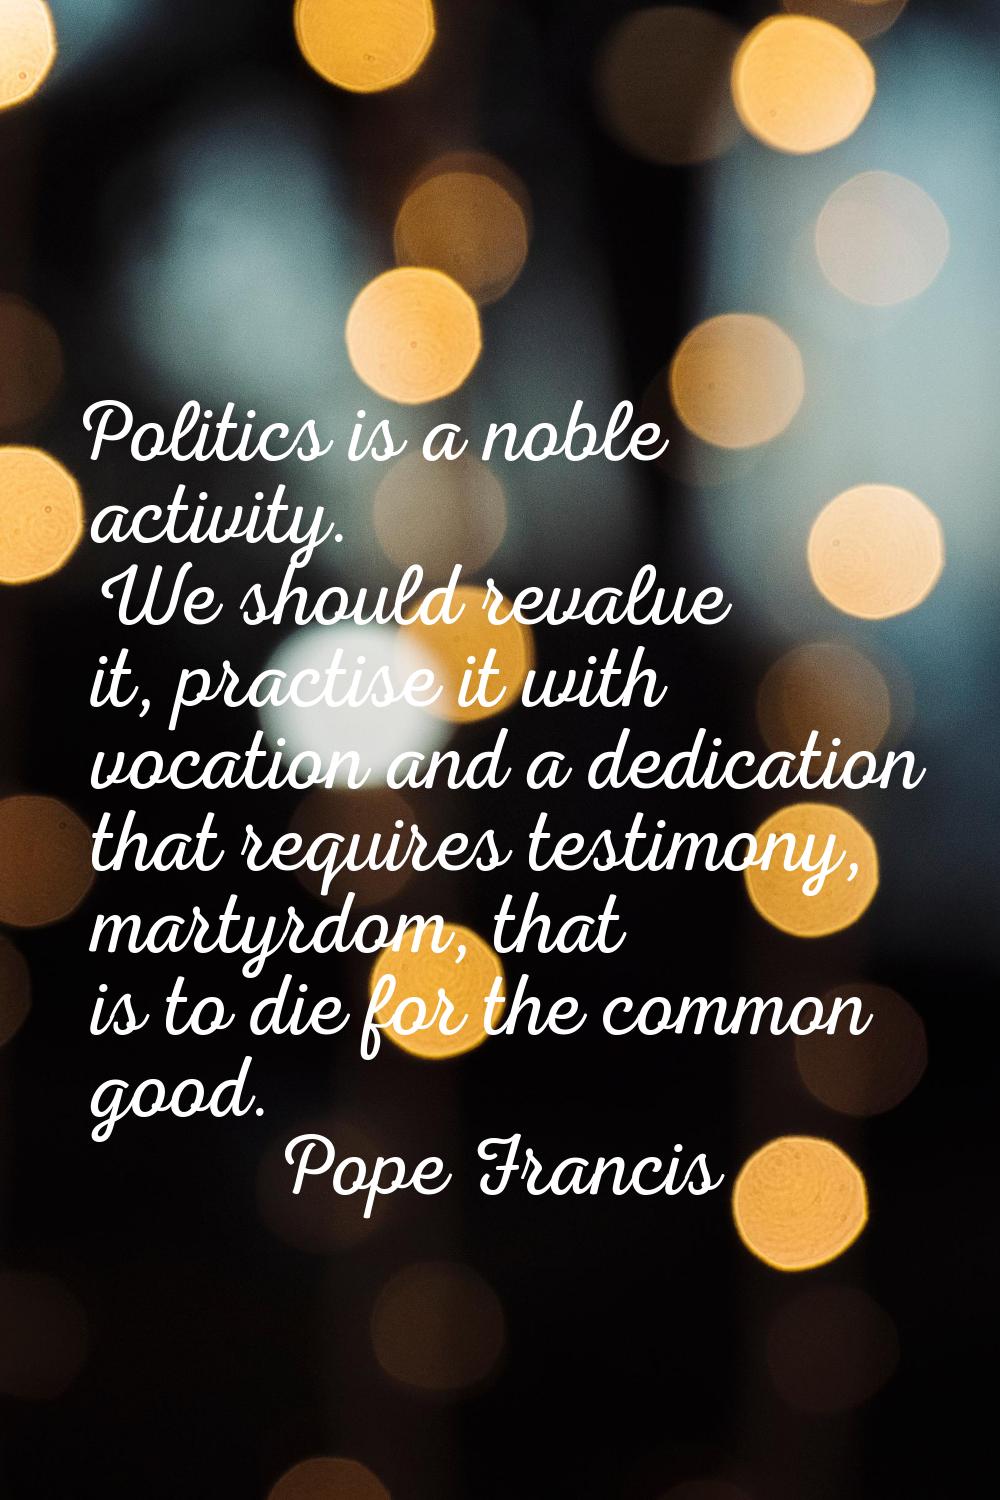 Politics is a noble activity. We should revalue it, practise it with vocation and a dedication that